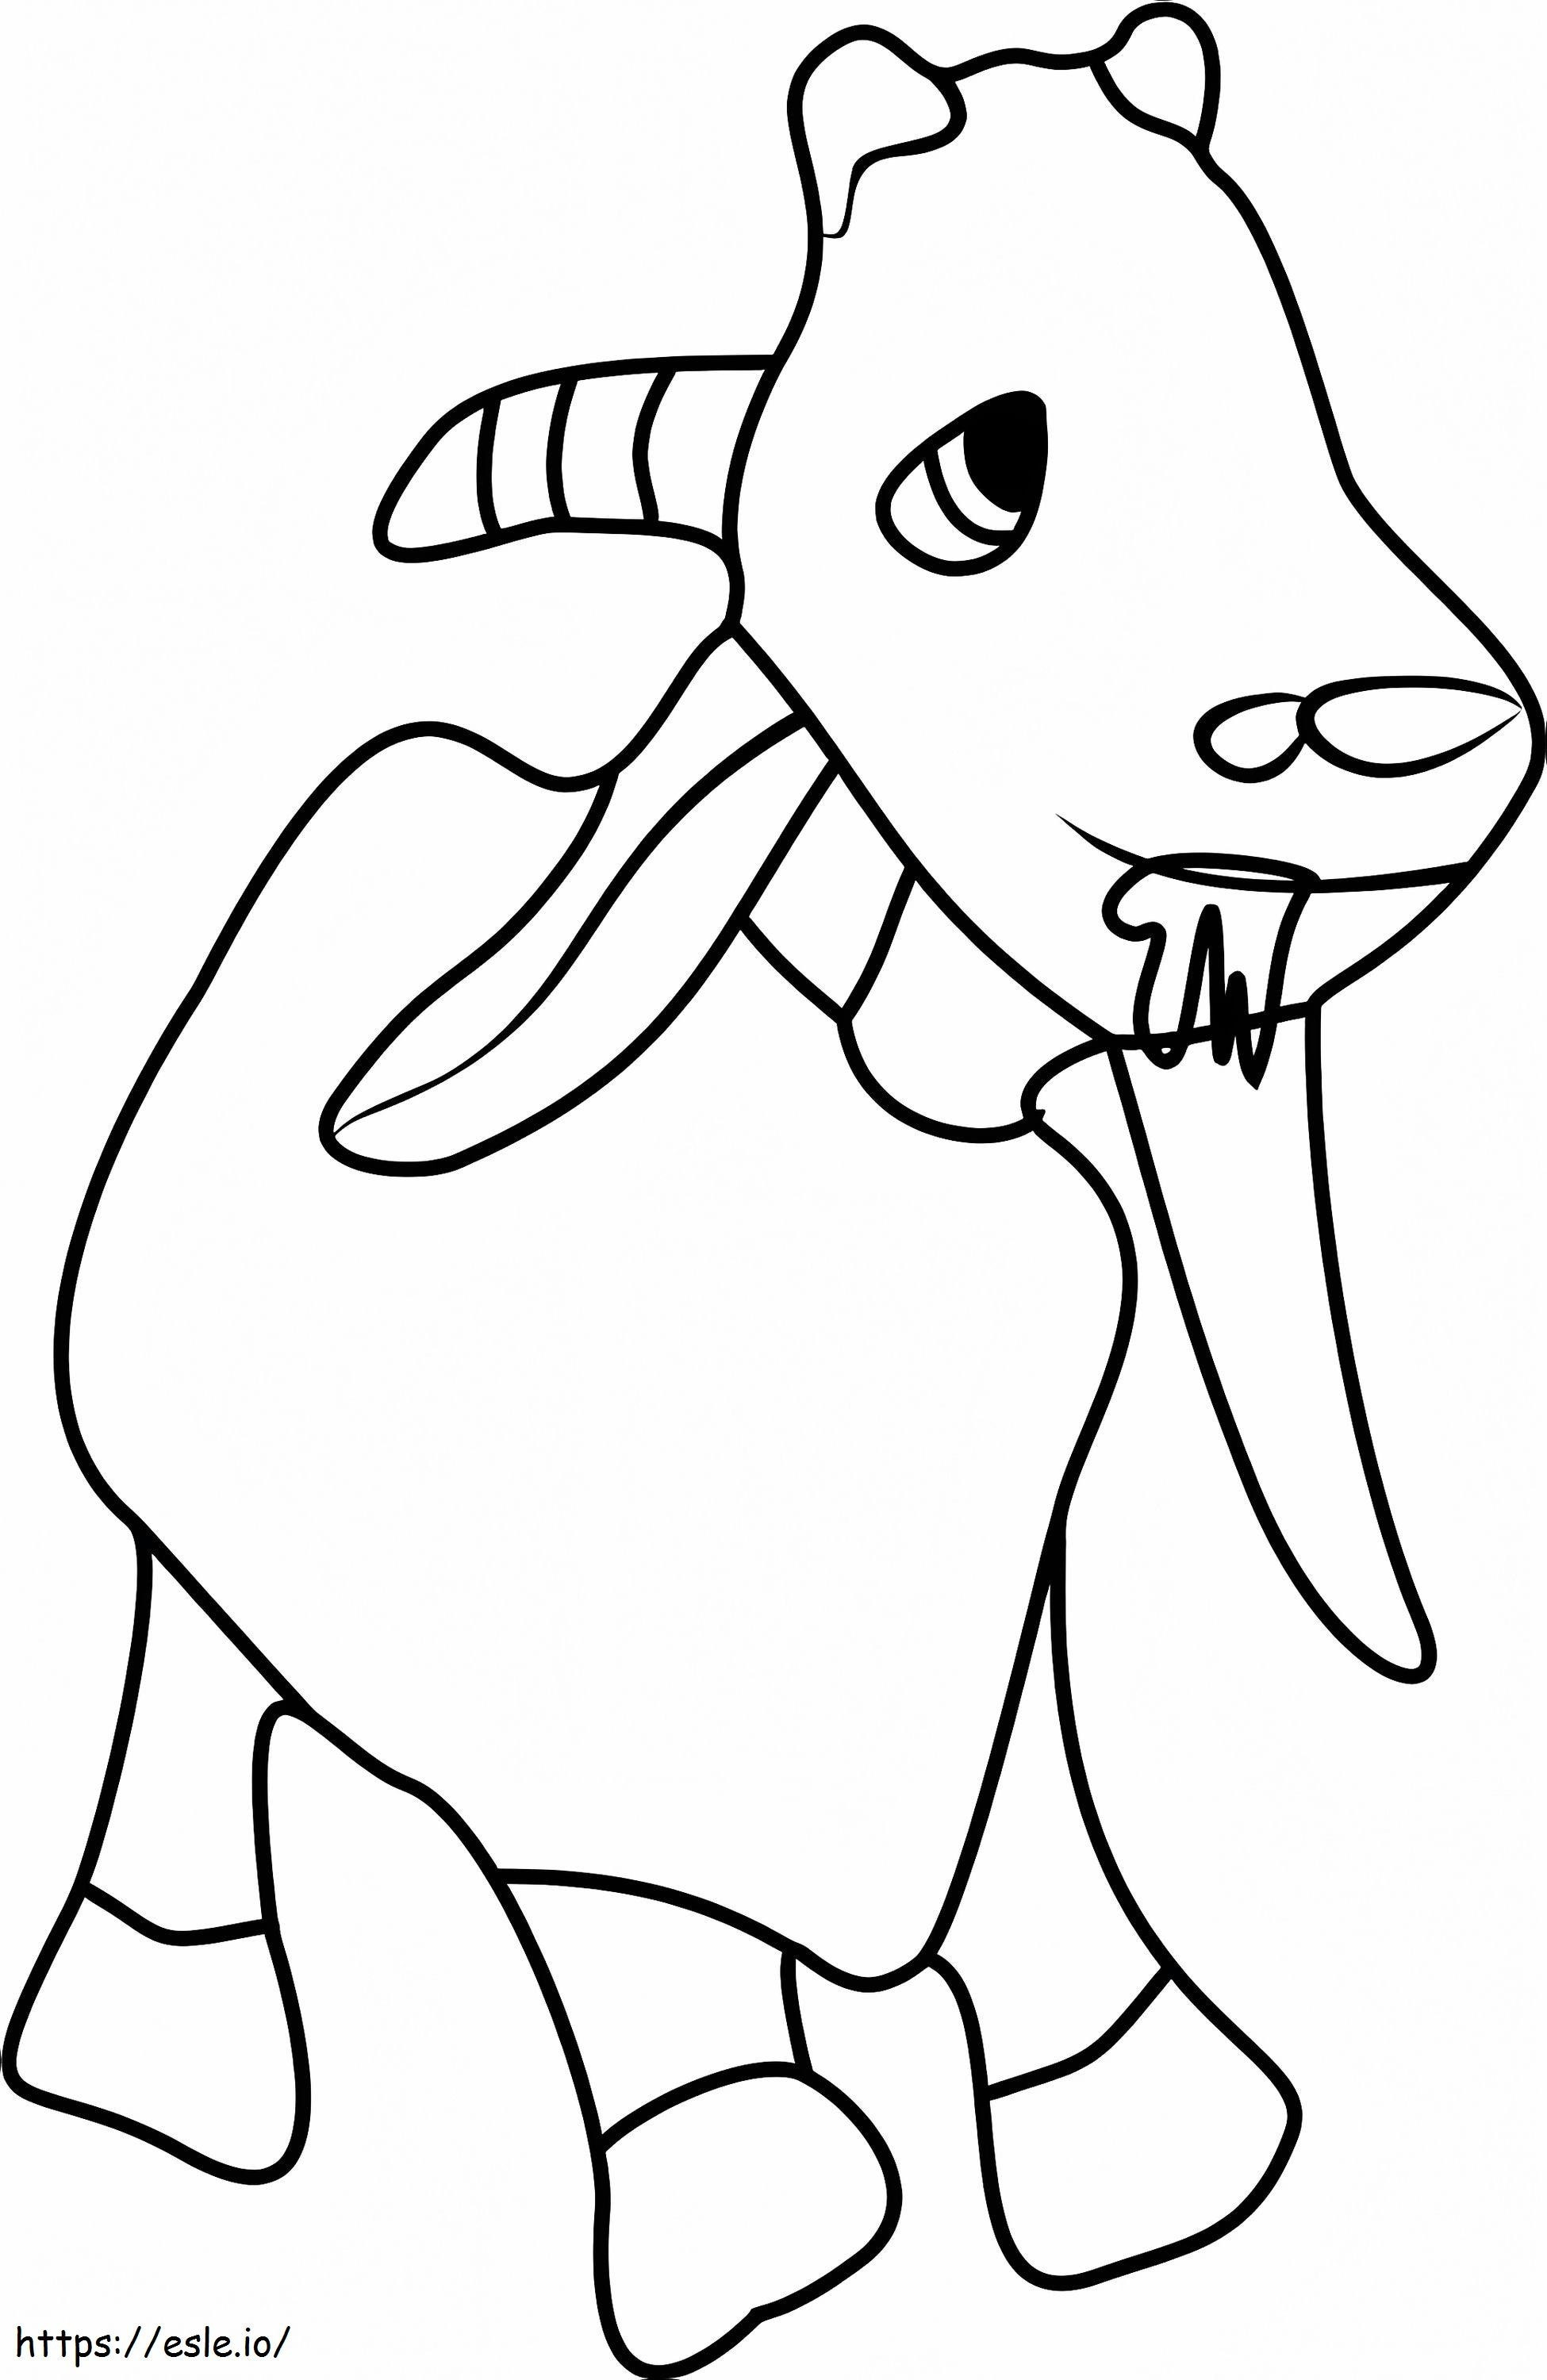 Goat In Masha And The Bear coloring page